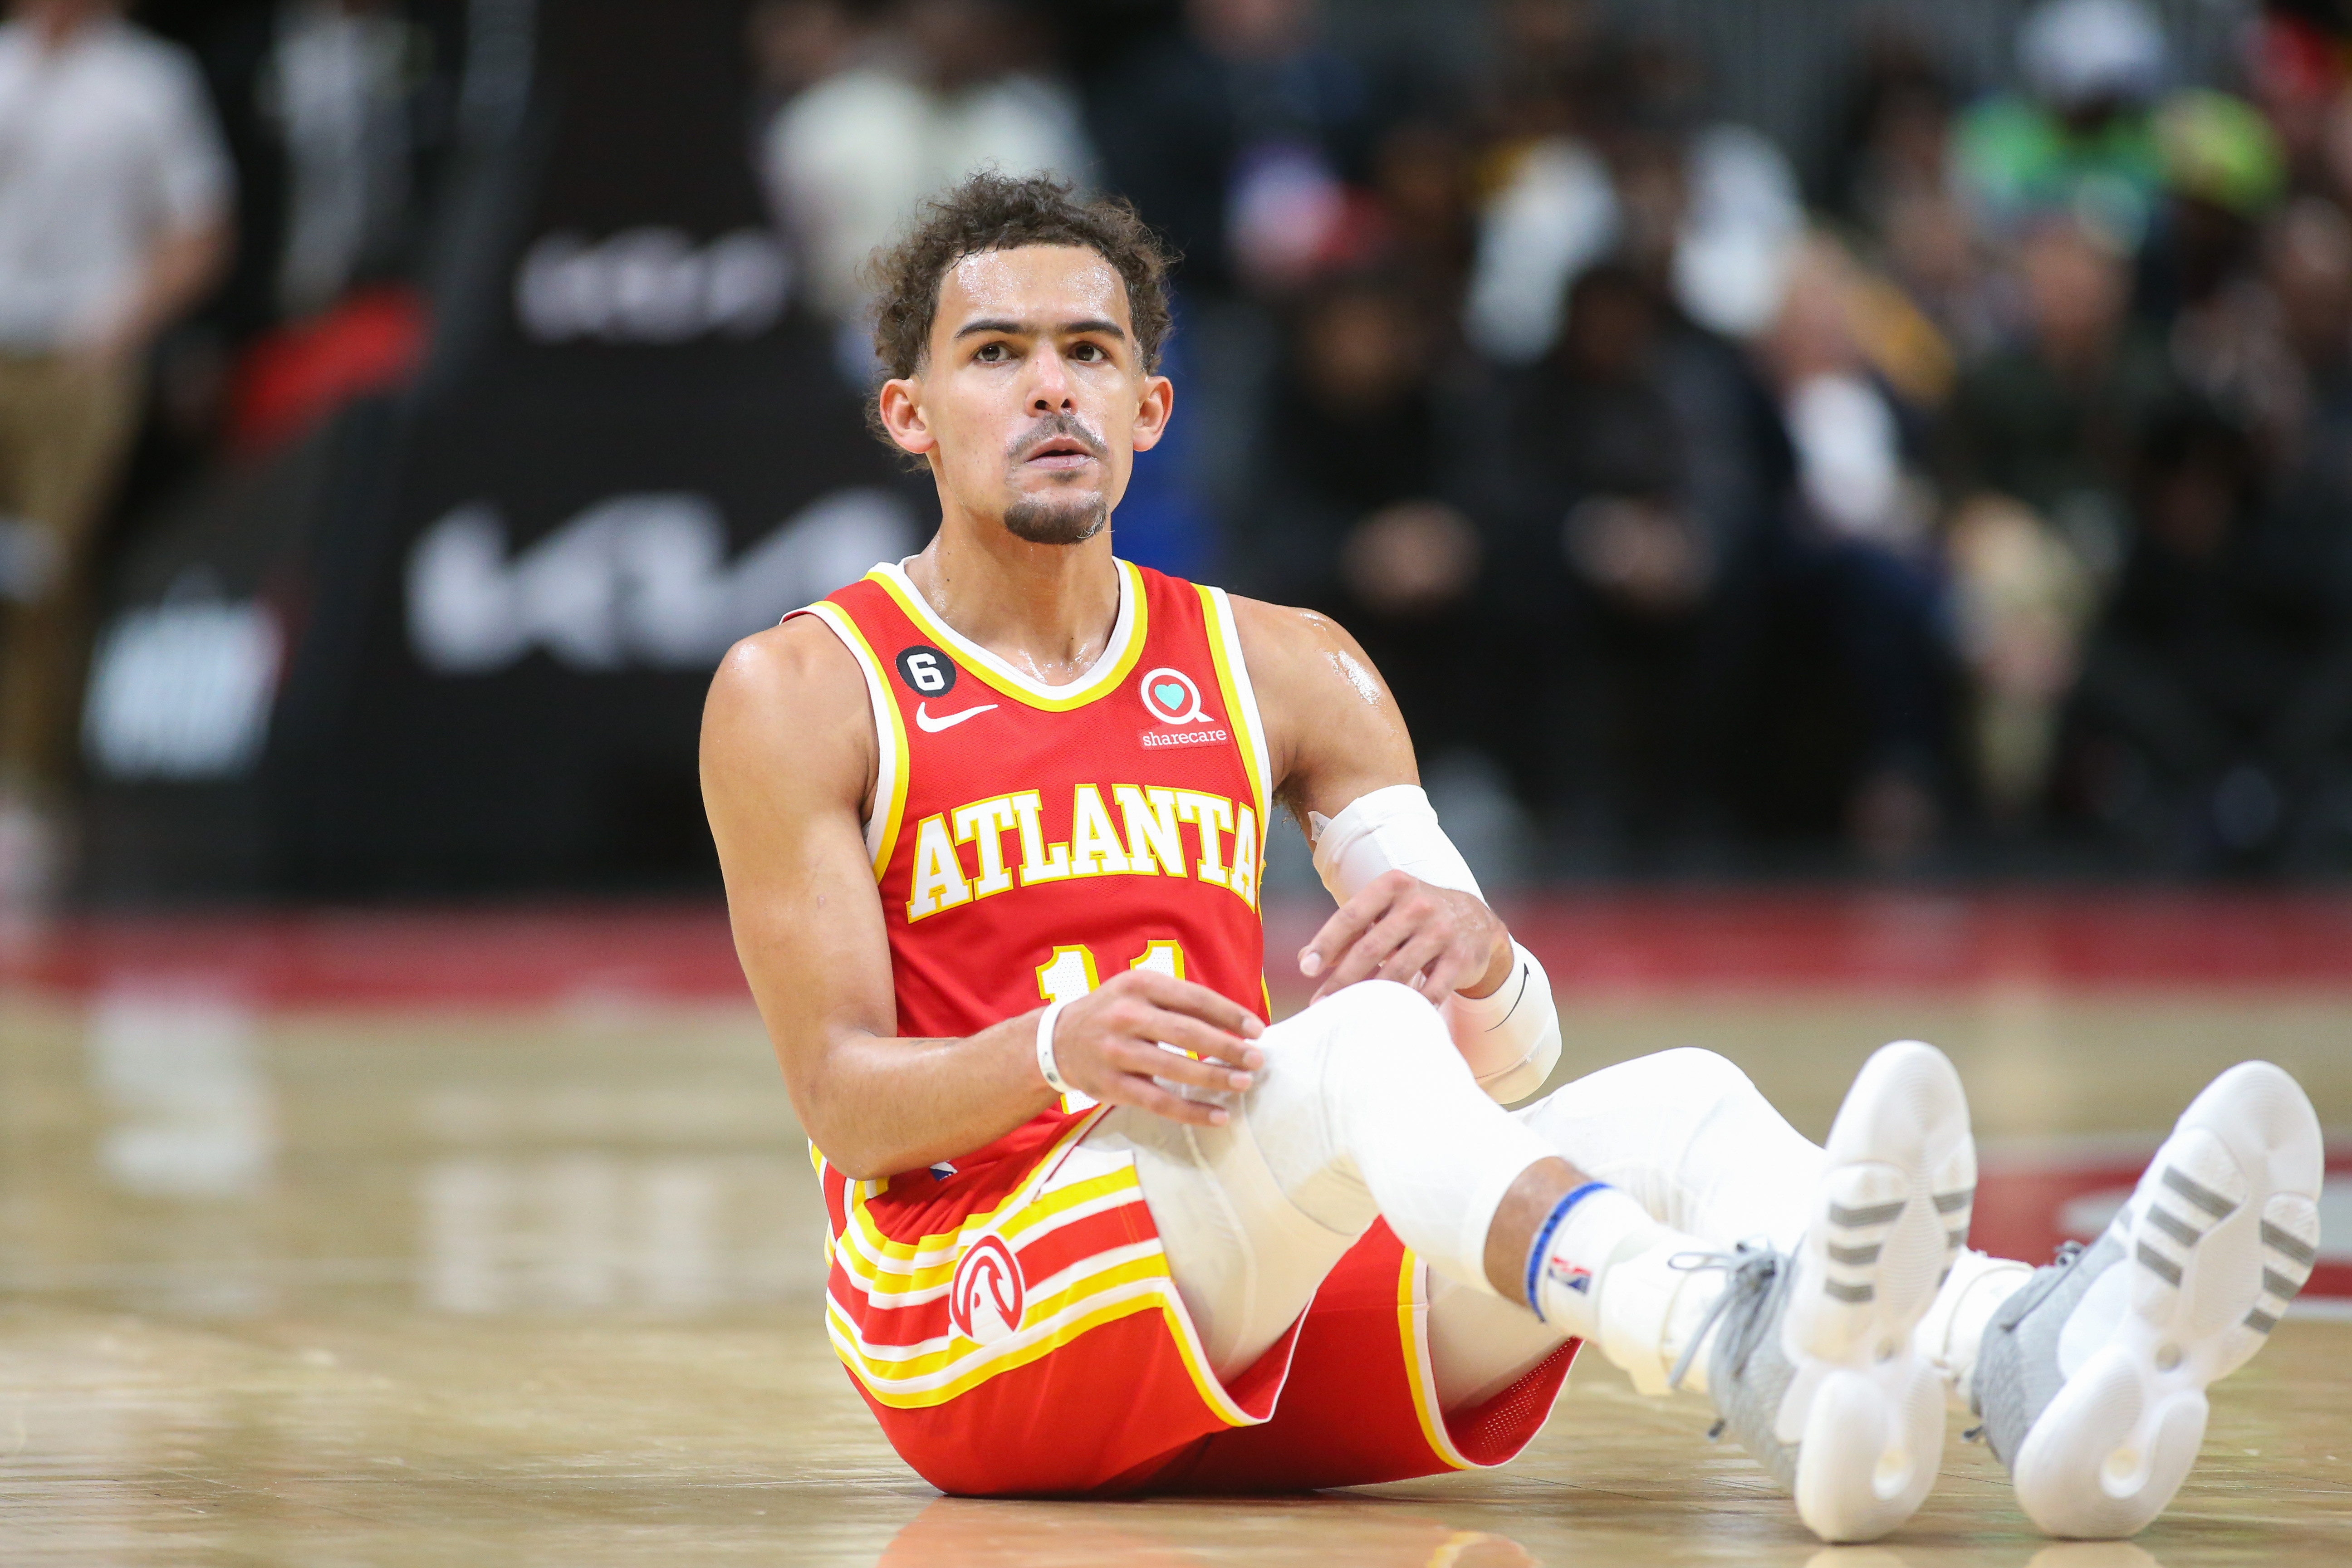 Sources: Trae Young Could Be Next NBA Superstar to Request Trade